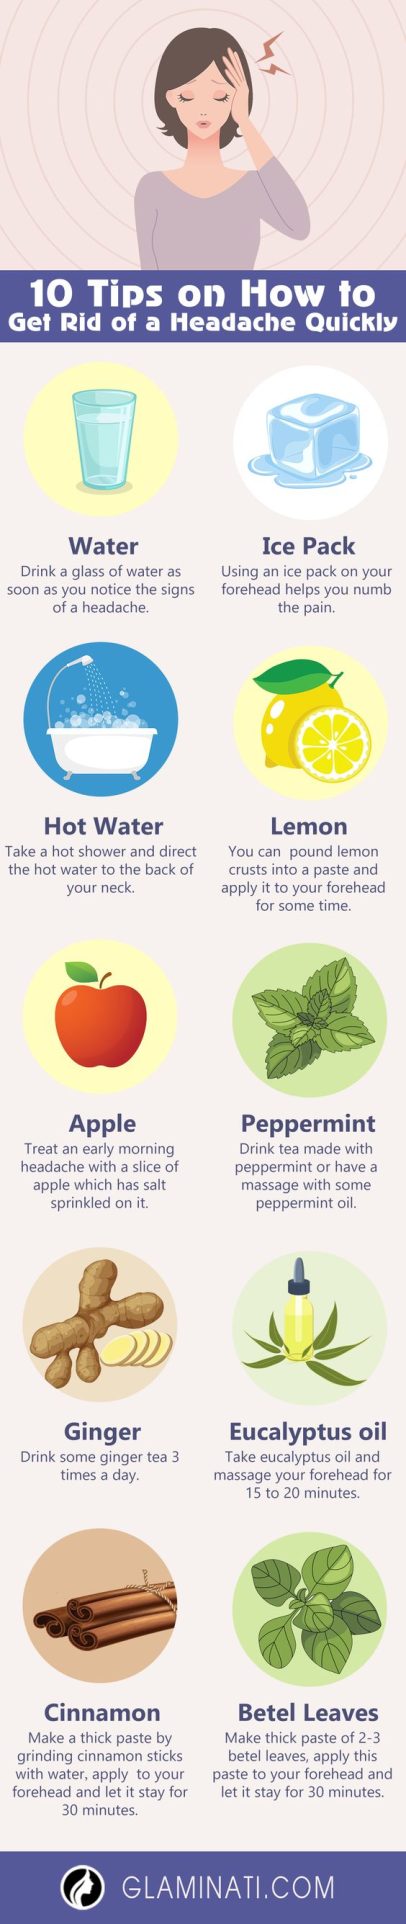 10 Tips On How To Get Rid Of A Headache Quickly – Infographic